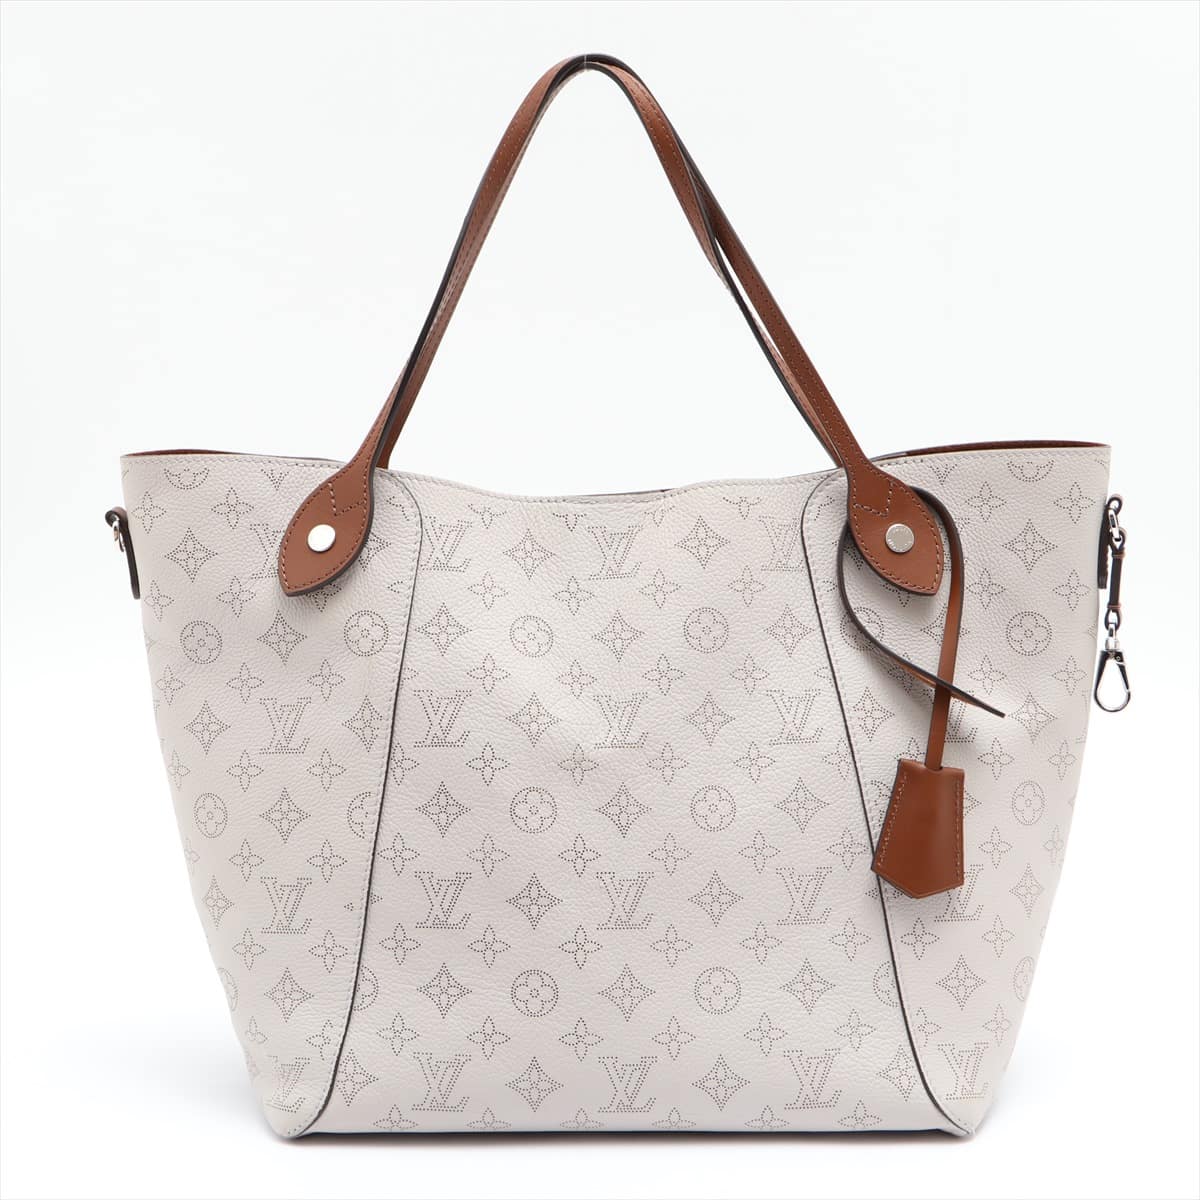 Louis Vuitton Mahina Hina MM M55552 Comes with pouch, slight cigarette smell